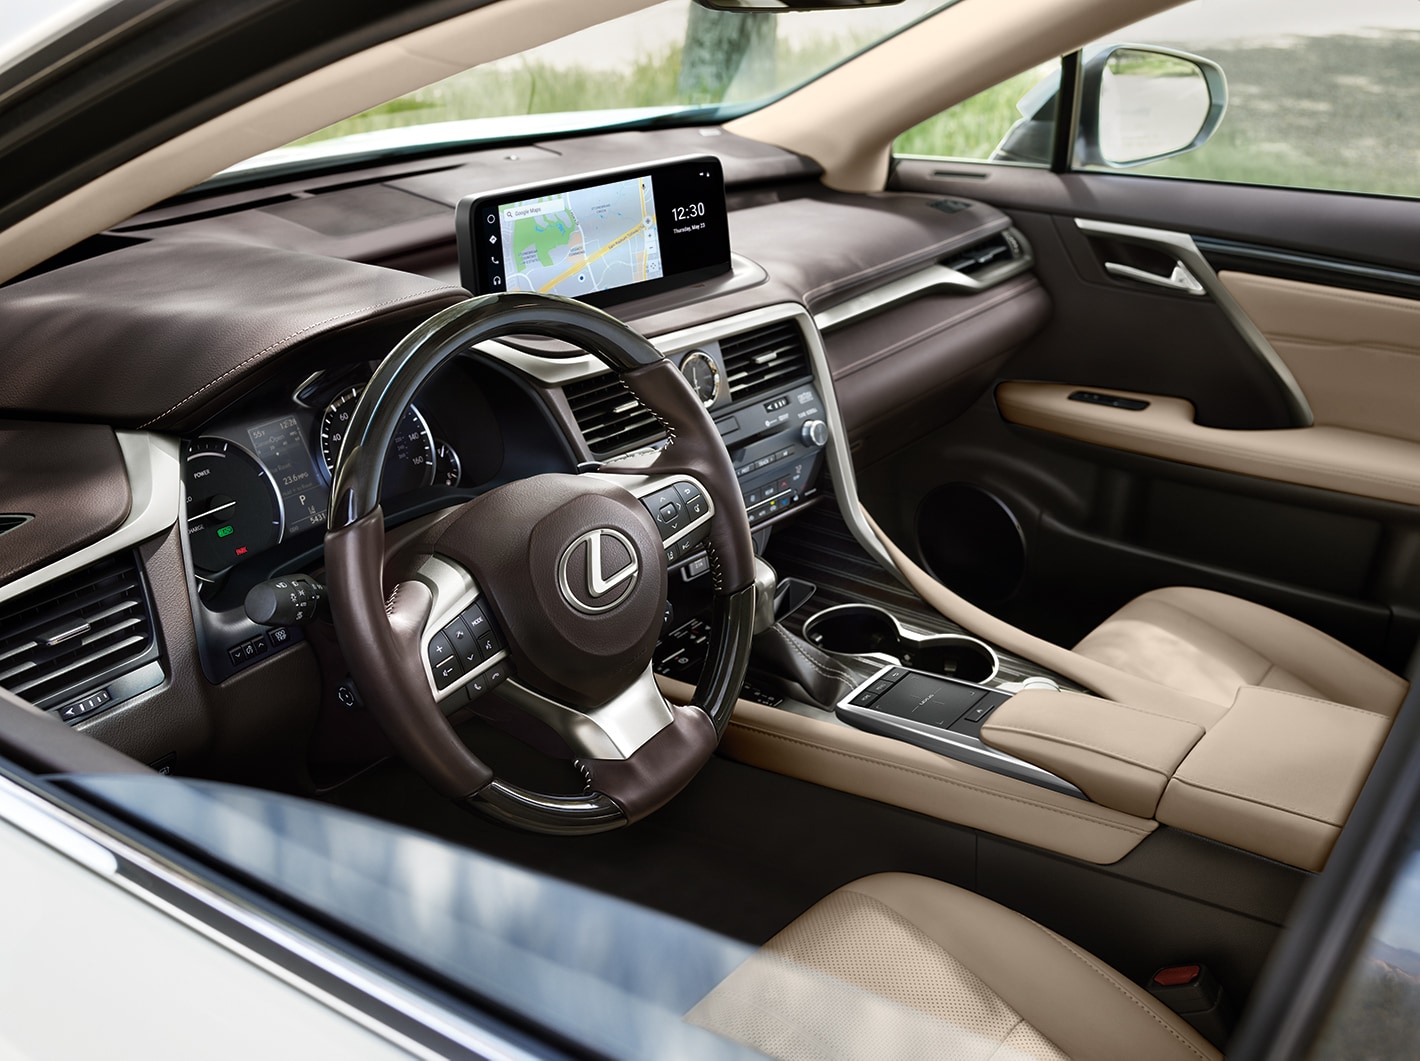 Compare the 2020 Lexus RX and the 2020 Acura MDX at Bobby Rahal Lexus of Lewistown | 2020 Lexus RX interior